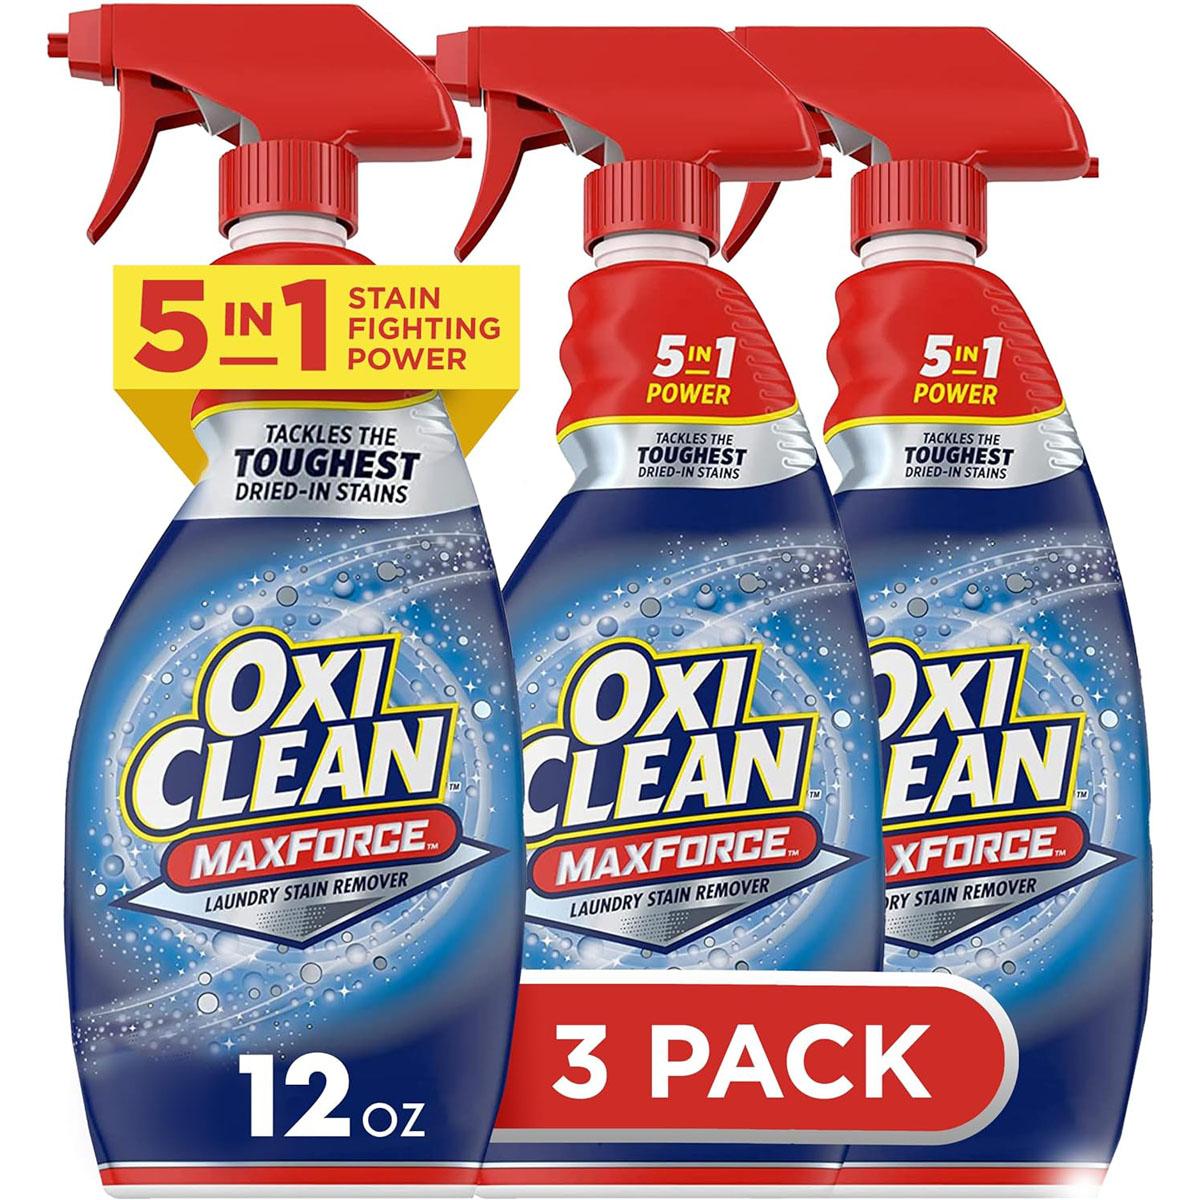 OxiClean Max Force Laundry Stain Remover Spray 3 Pack for $8.05 Shipped